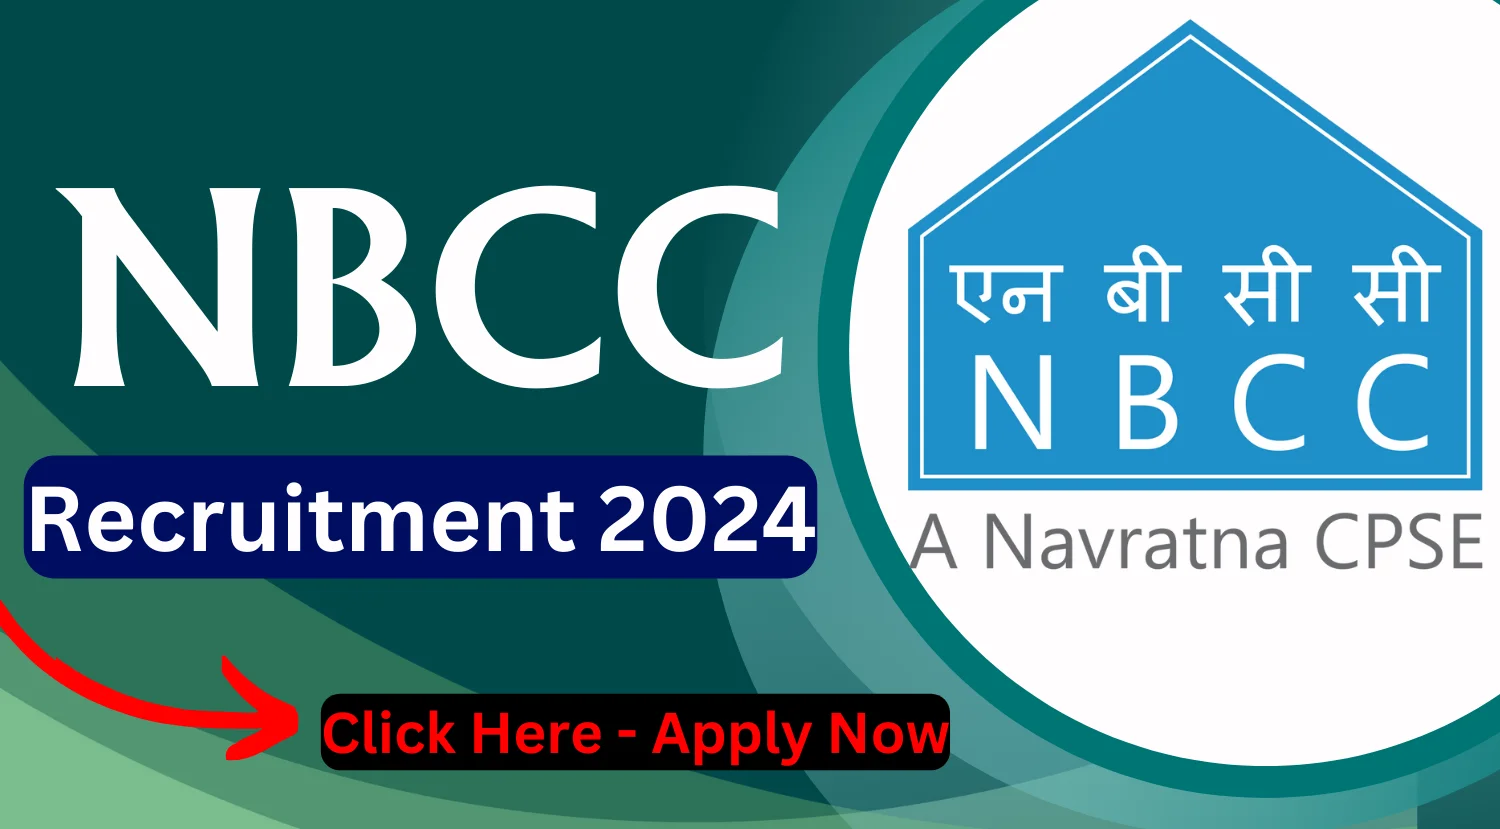 NBCC Recruitment 2024 Notification Out for 93 Vacancies